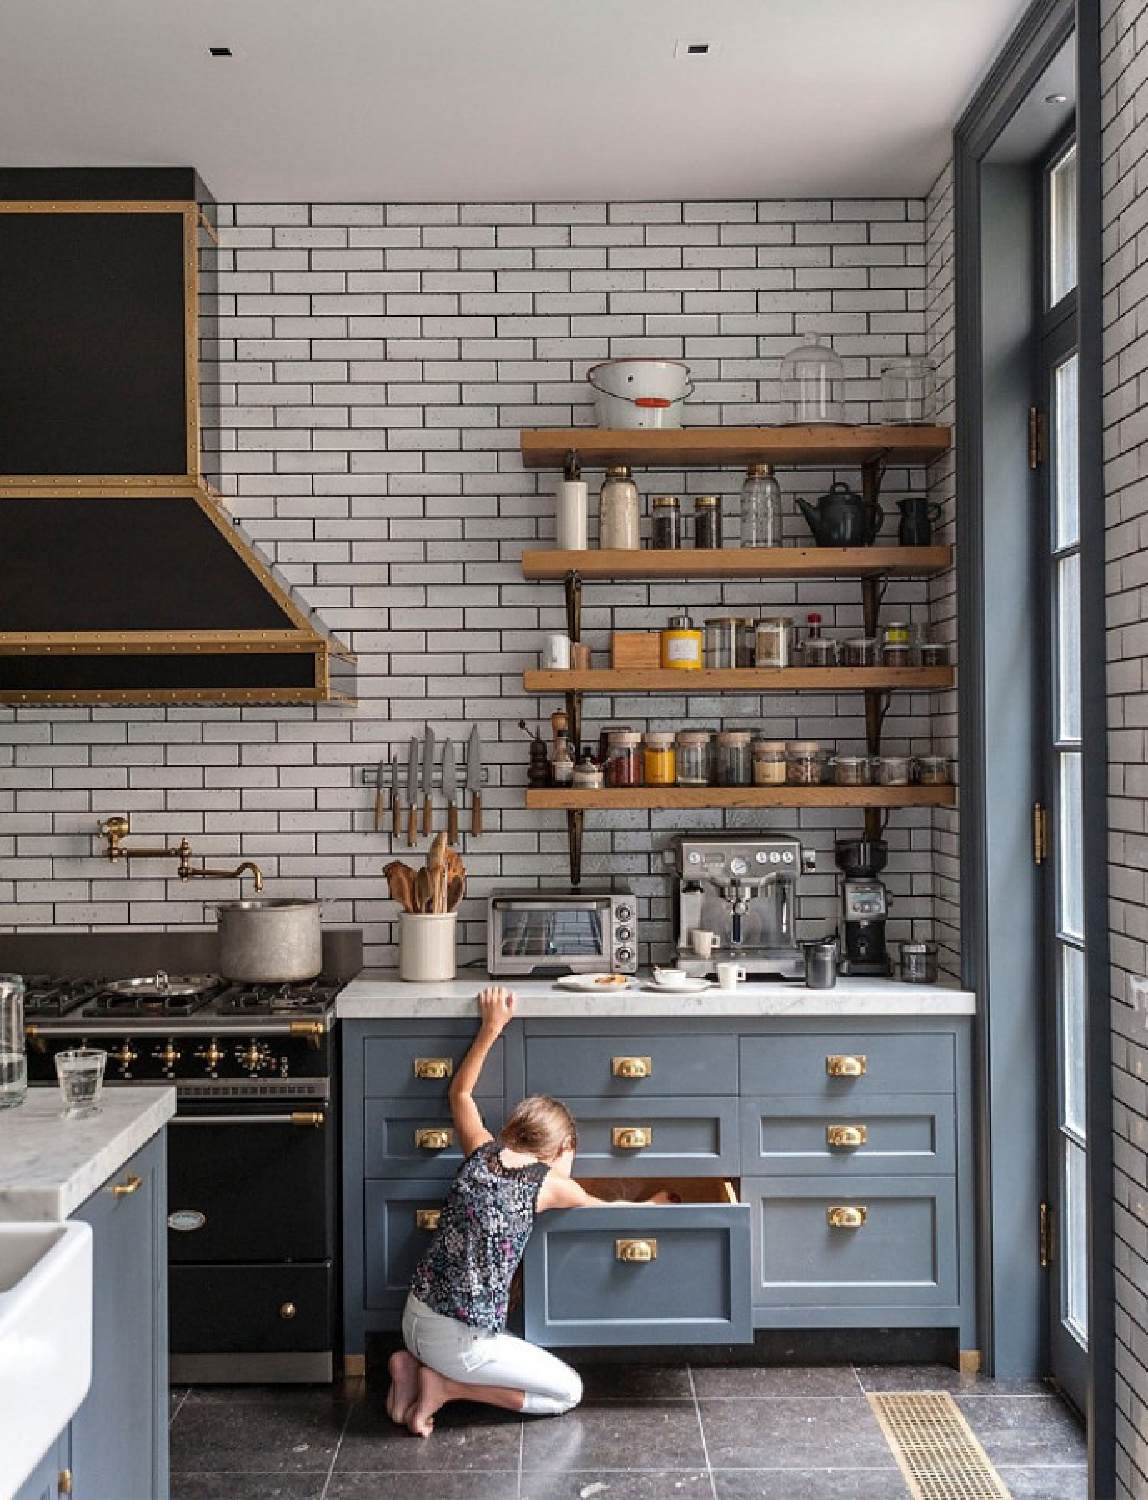 Black And White Kitchens: Ideas, Photos, Inspirations